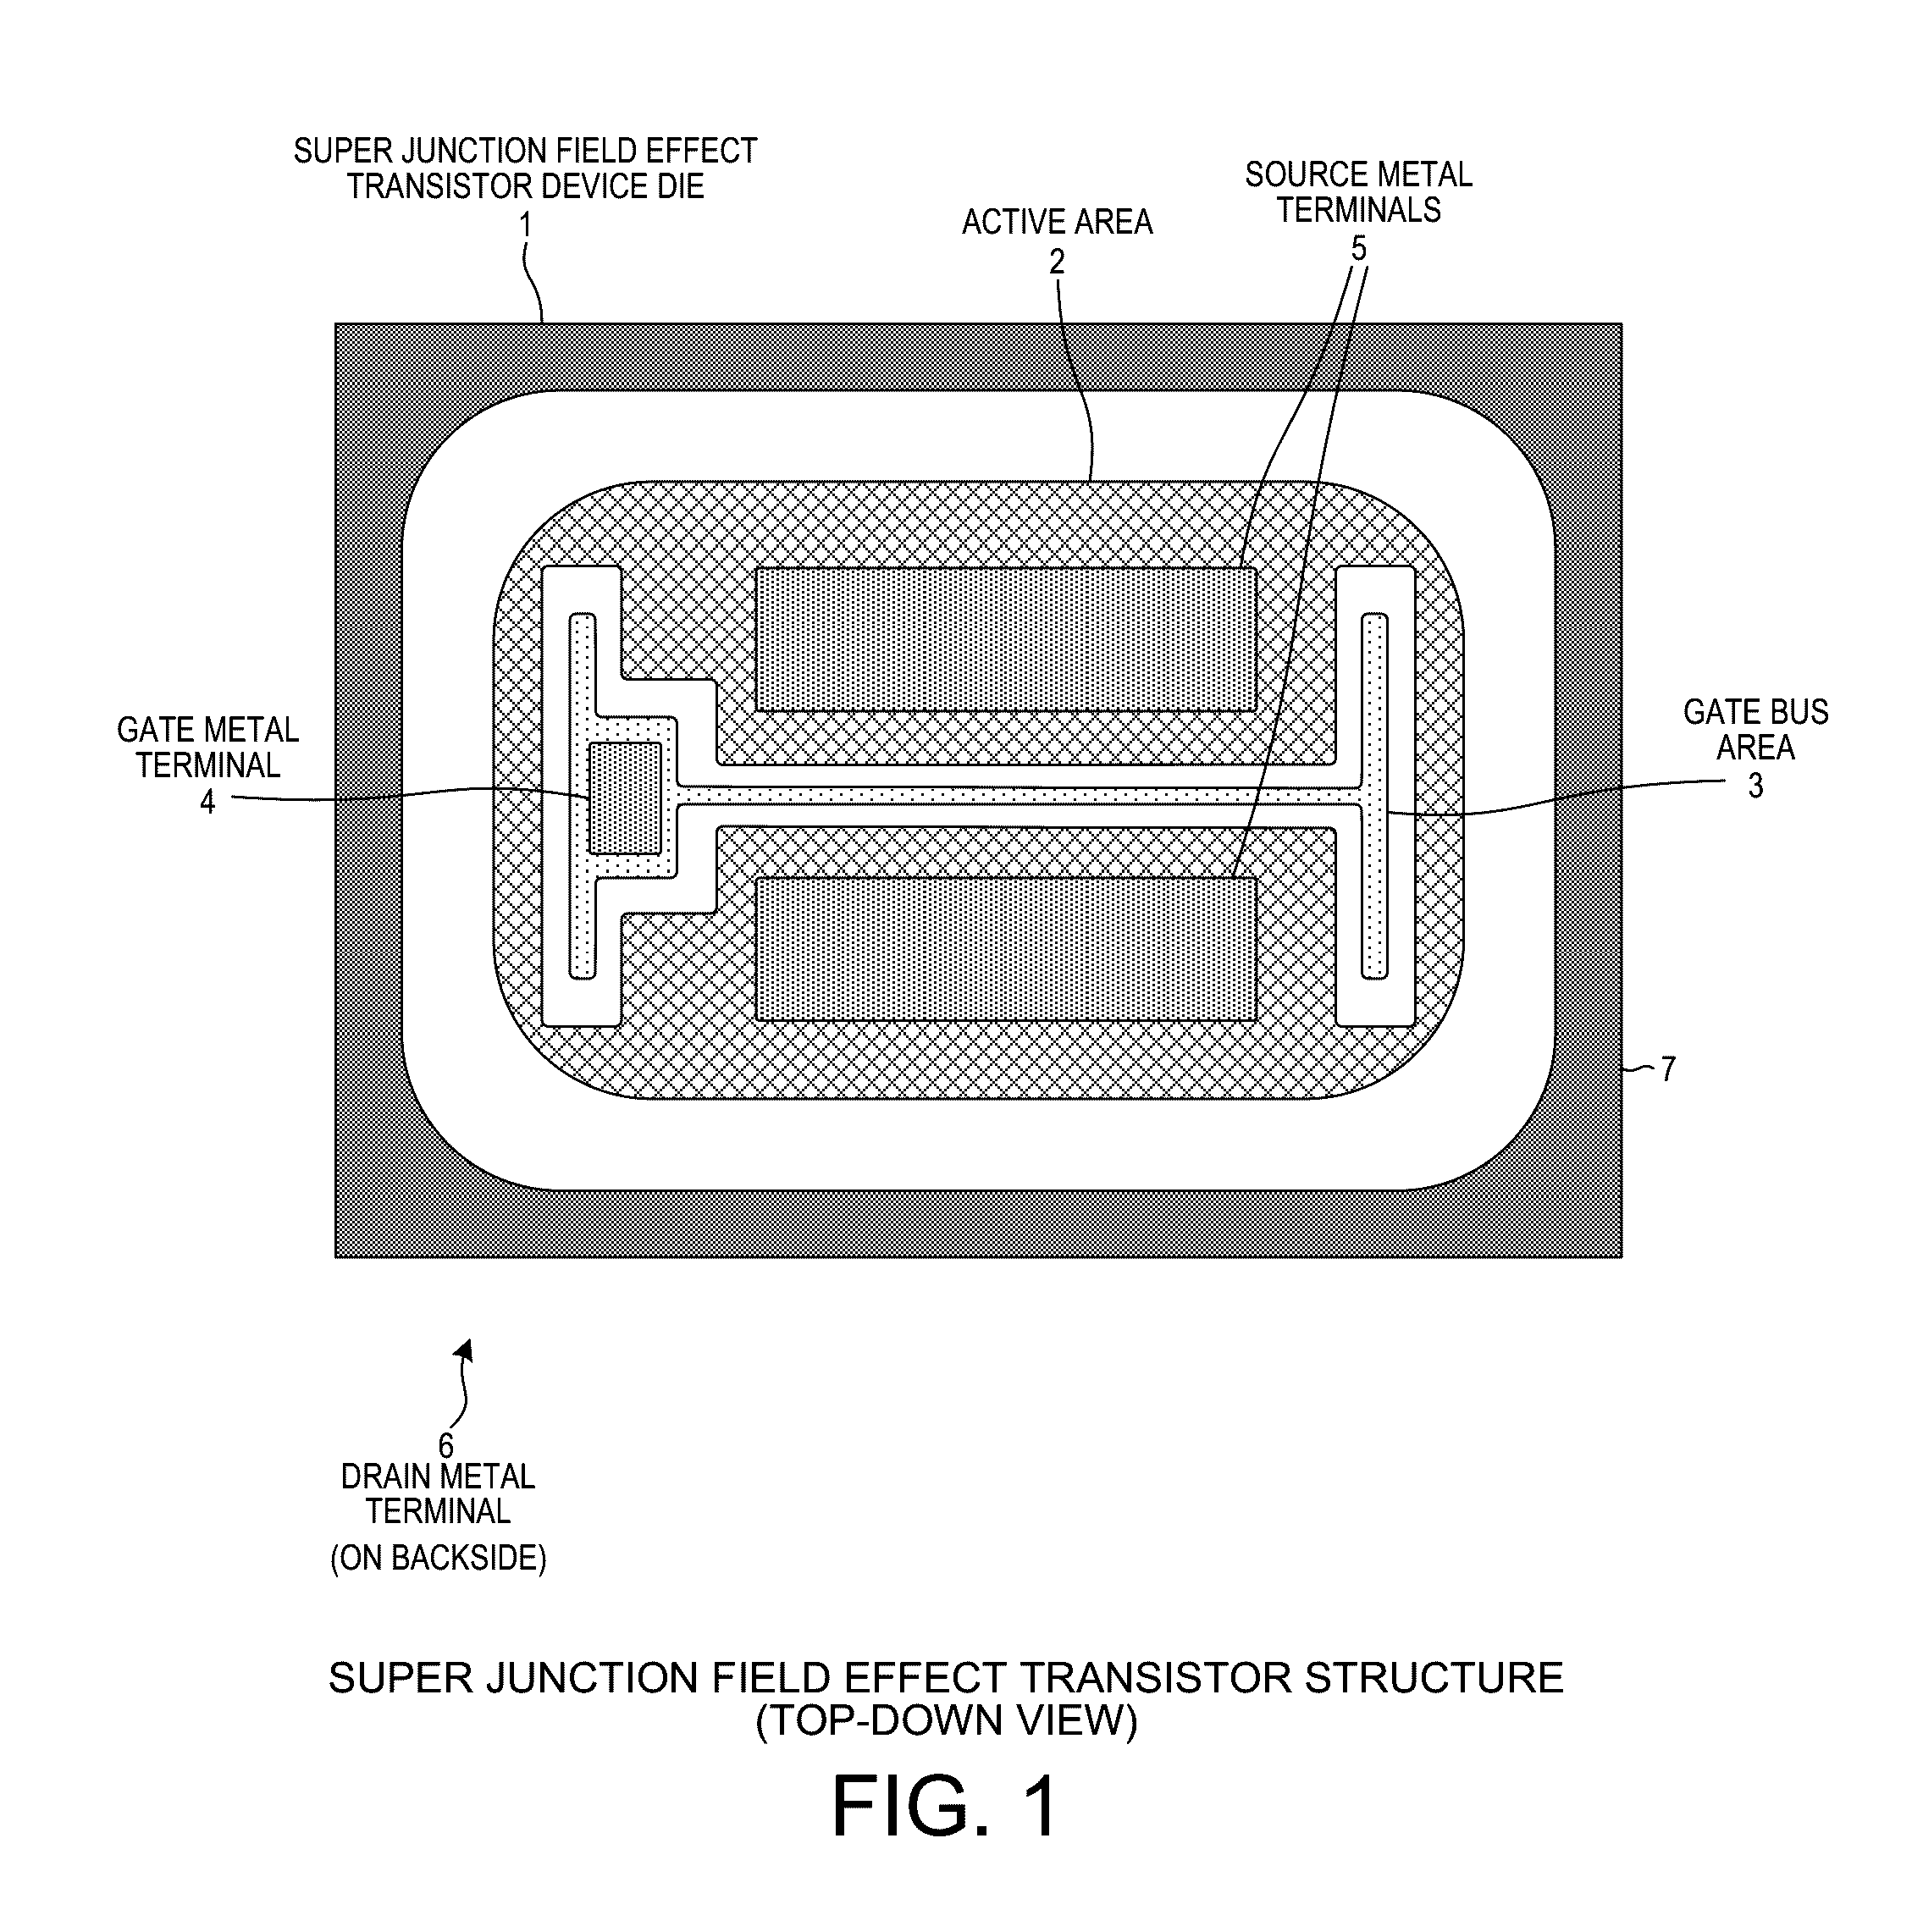 Super junction field effect transistor with internal floating ring